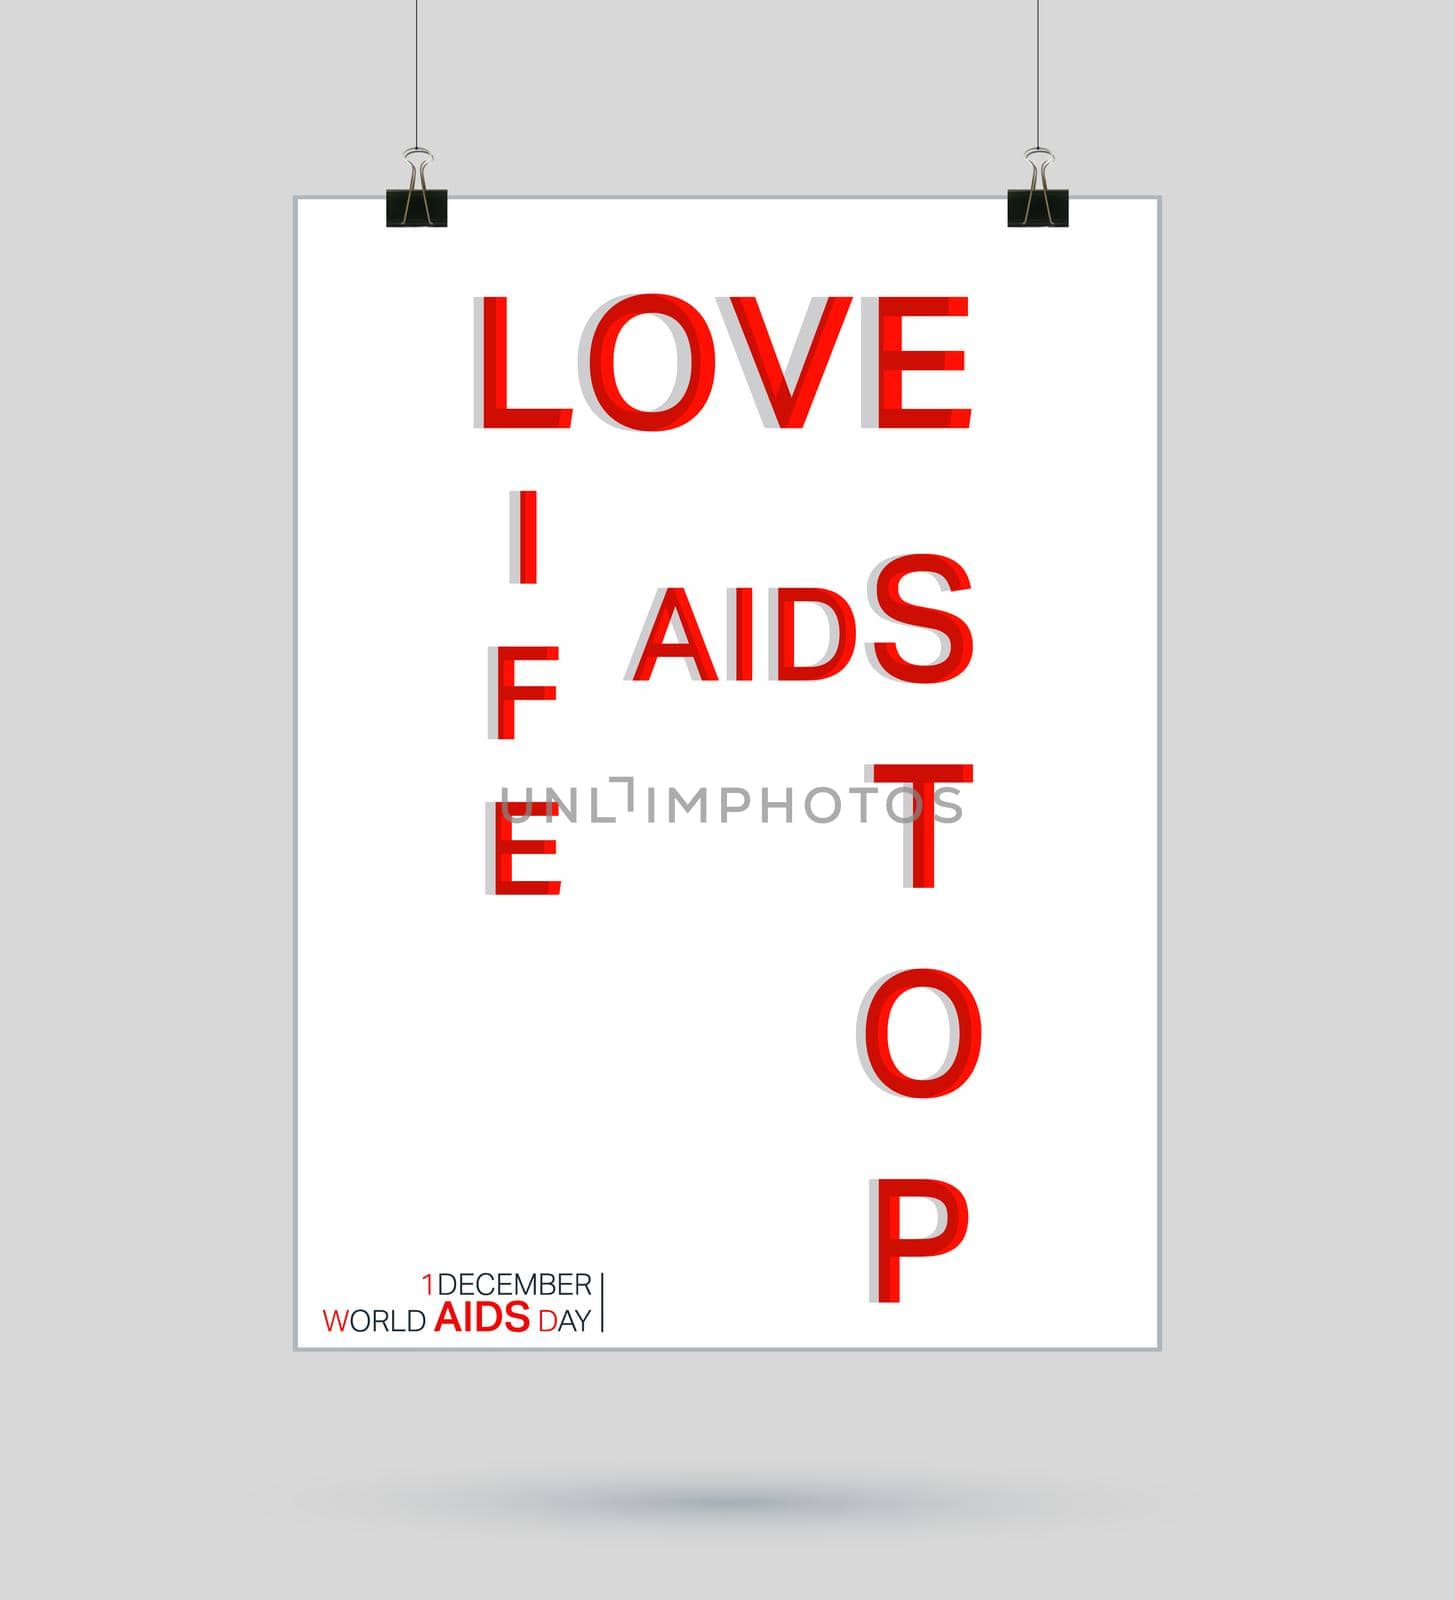 World Aids Day poster. Love life, aids stop. Vector illustration